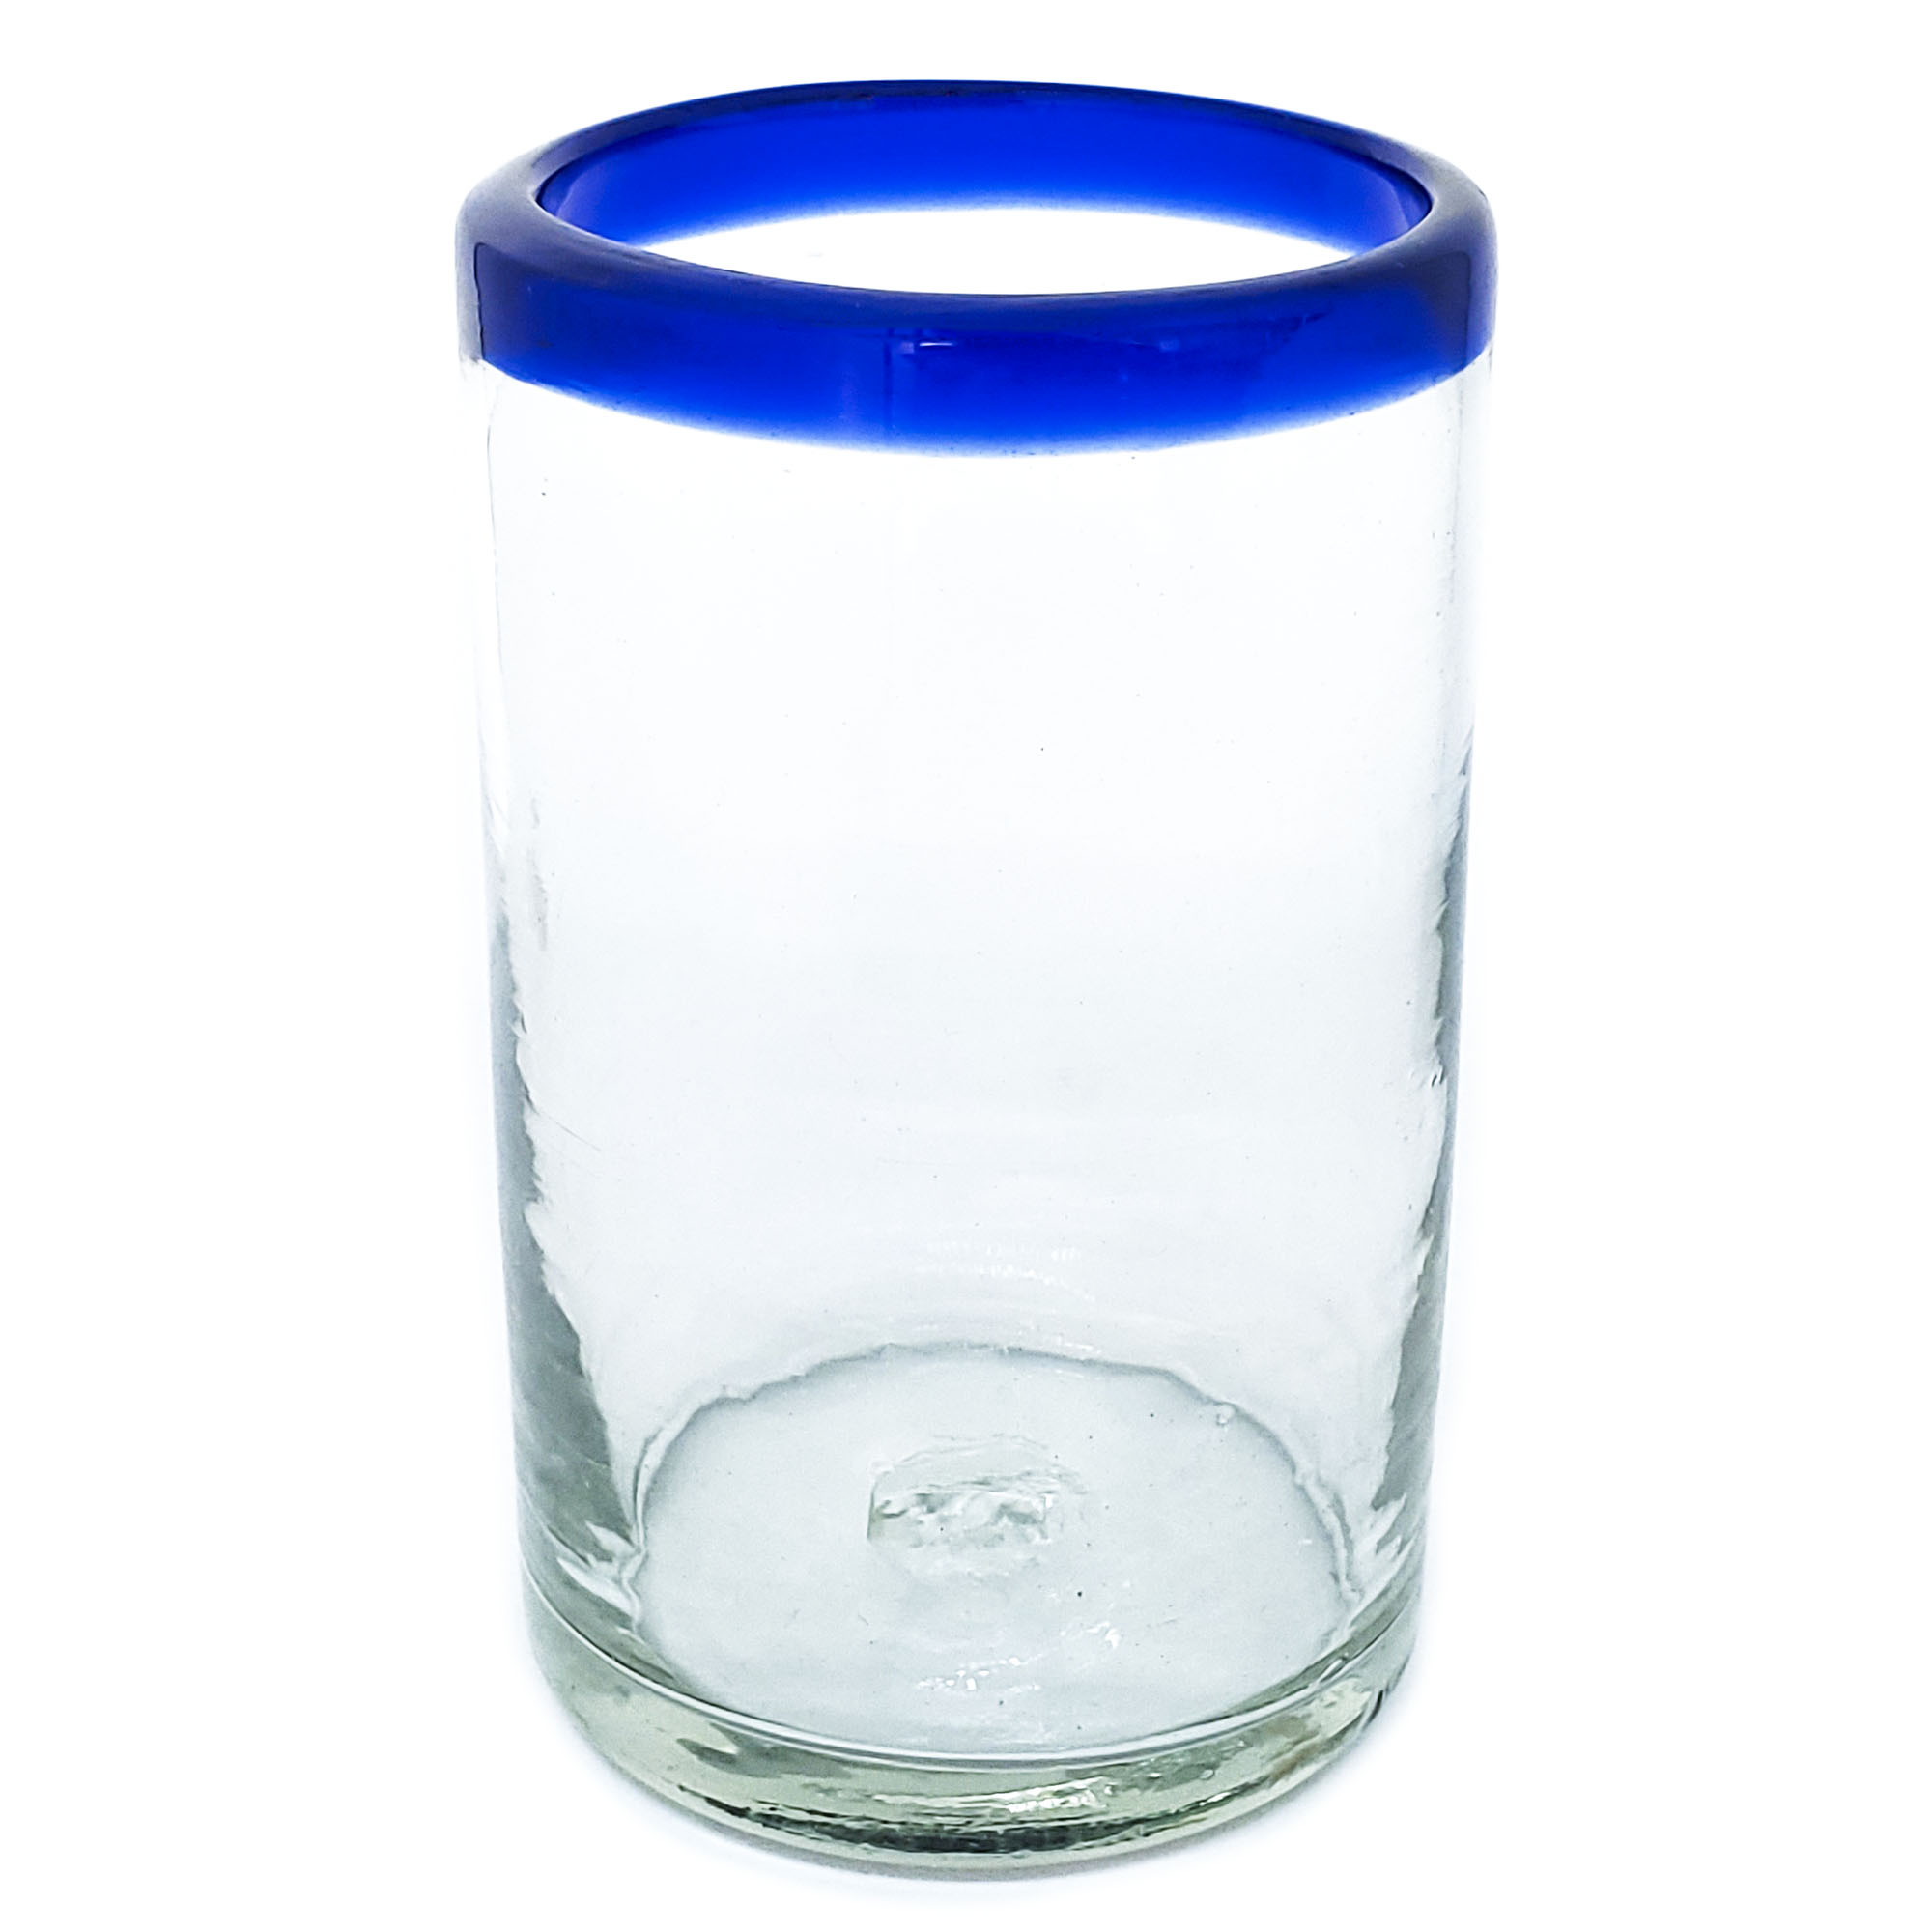 Wholesale Colored Rim Glassware / Cobalt Blue Rim 14 oz Drinking Glasses  / These handcrafted glasses deliver a classic touch to your favorite drink.